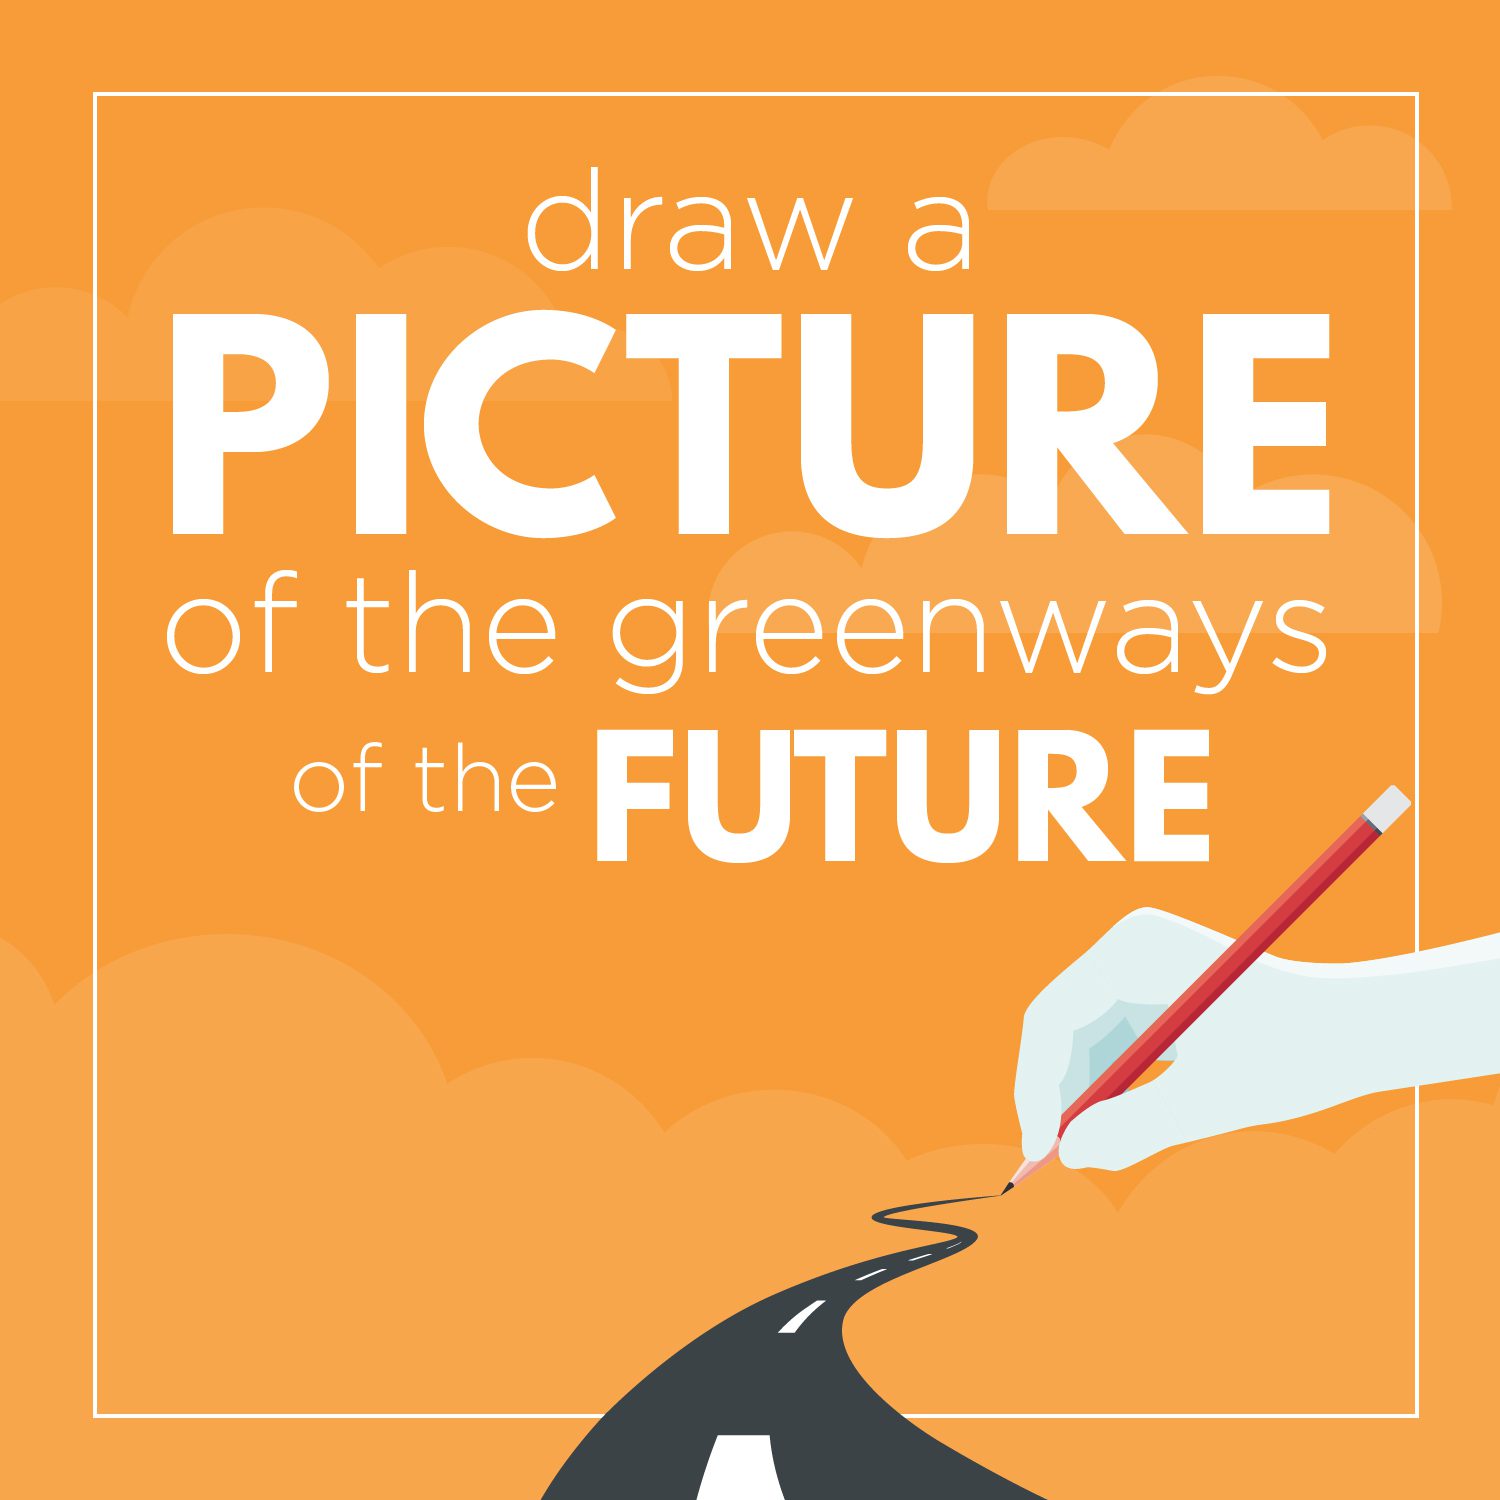 Draw a picture of the greenways of the future